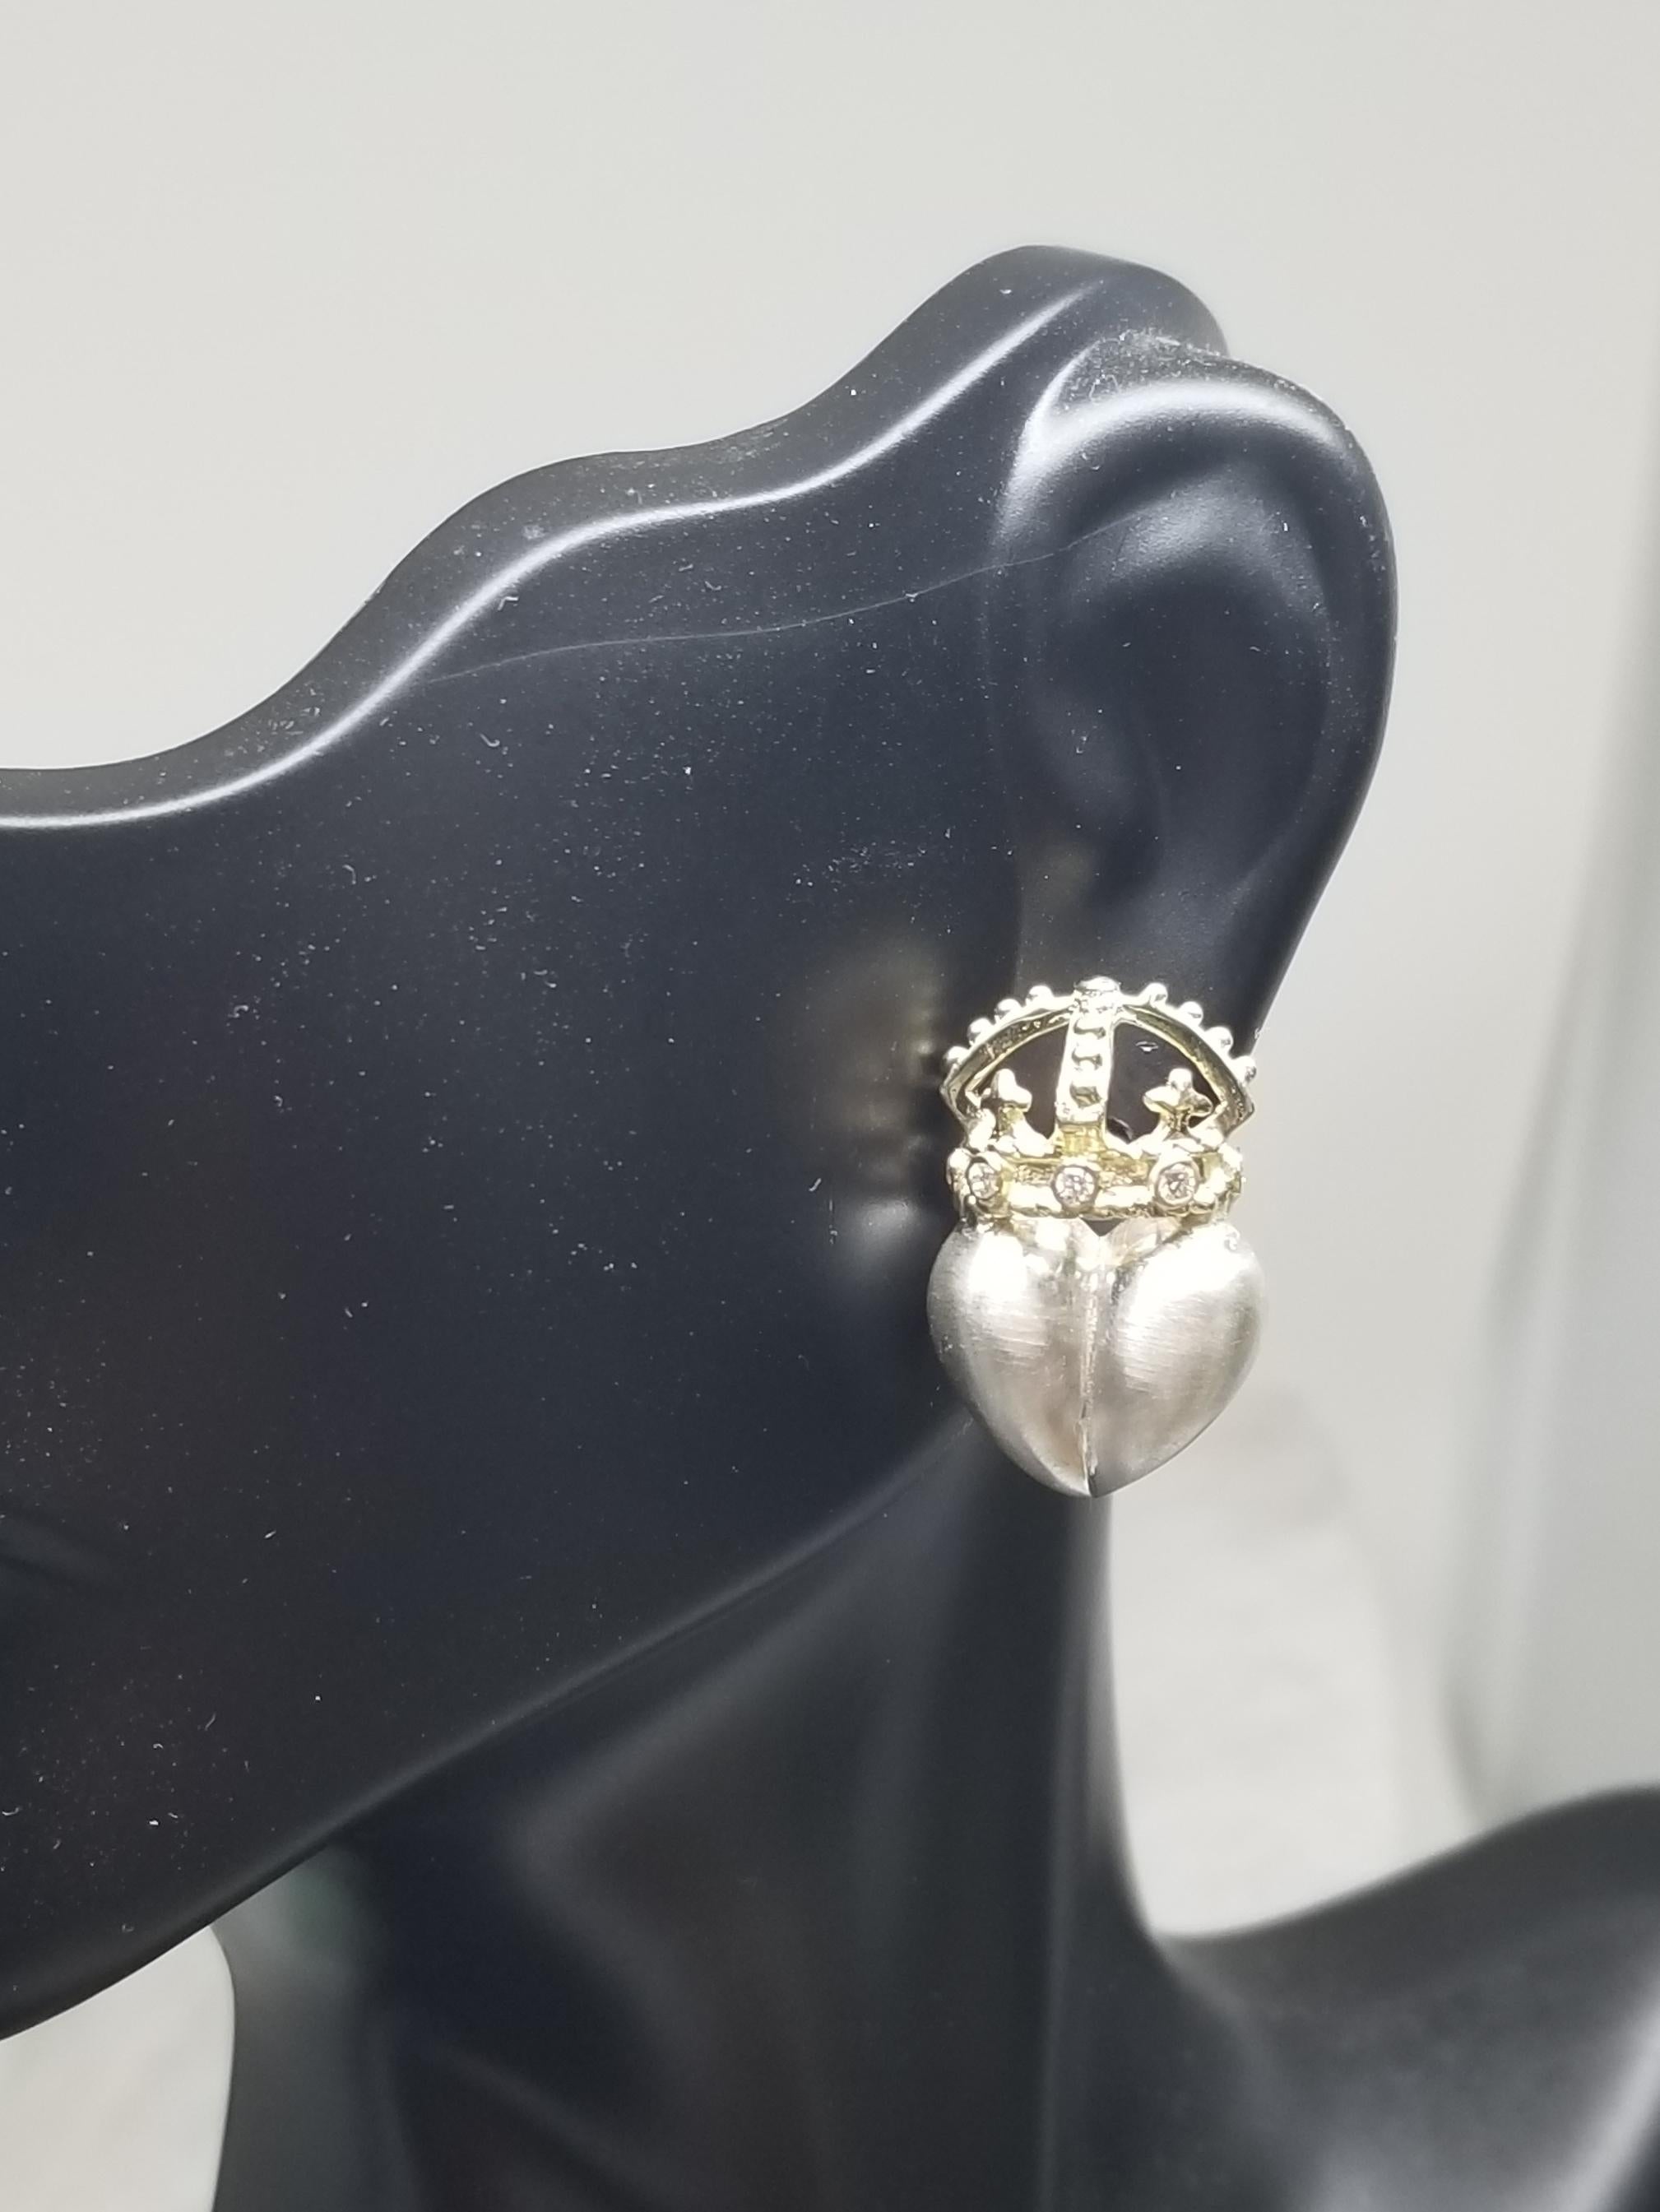 Artisan 14 Karat Yellow Gold Crown with Diamonds and Silver Brushed Hearts Earrings